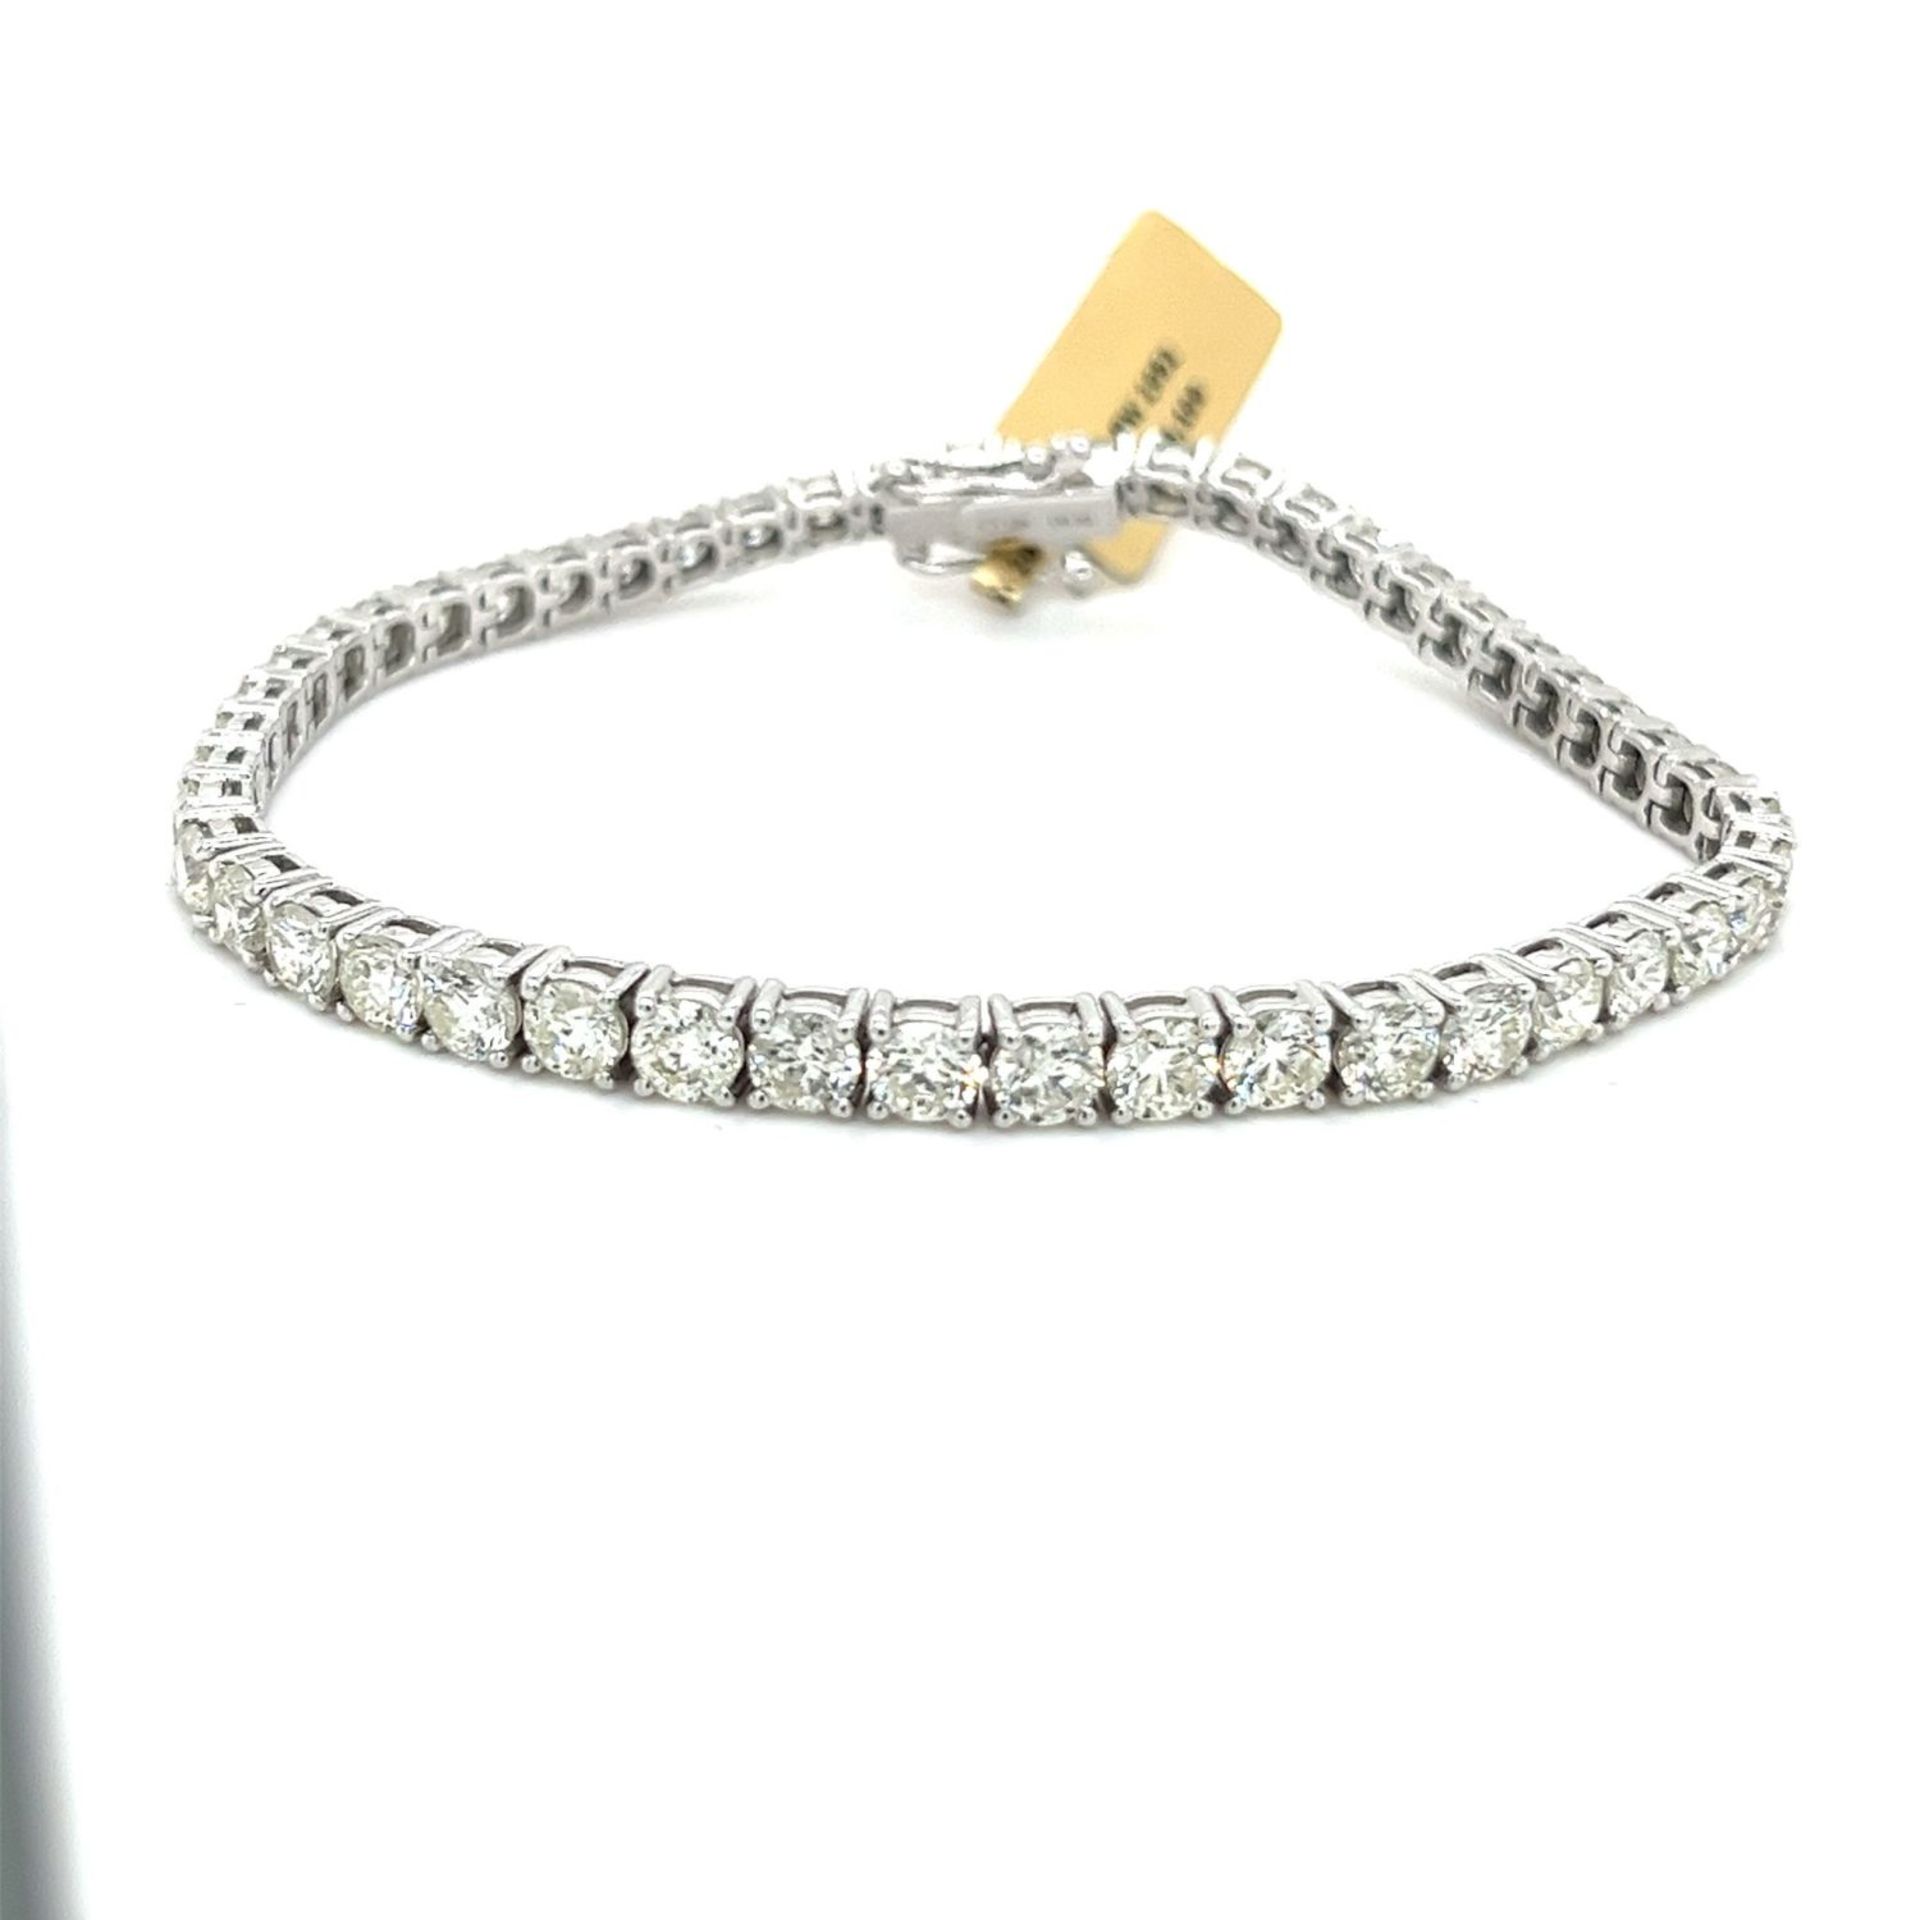 APPROX. 9.00CT DIAMOND TENNIS BRACELET in 18CT WHITE GOLD £18000 VALUATION